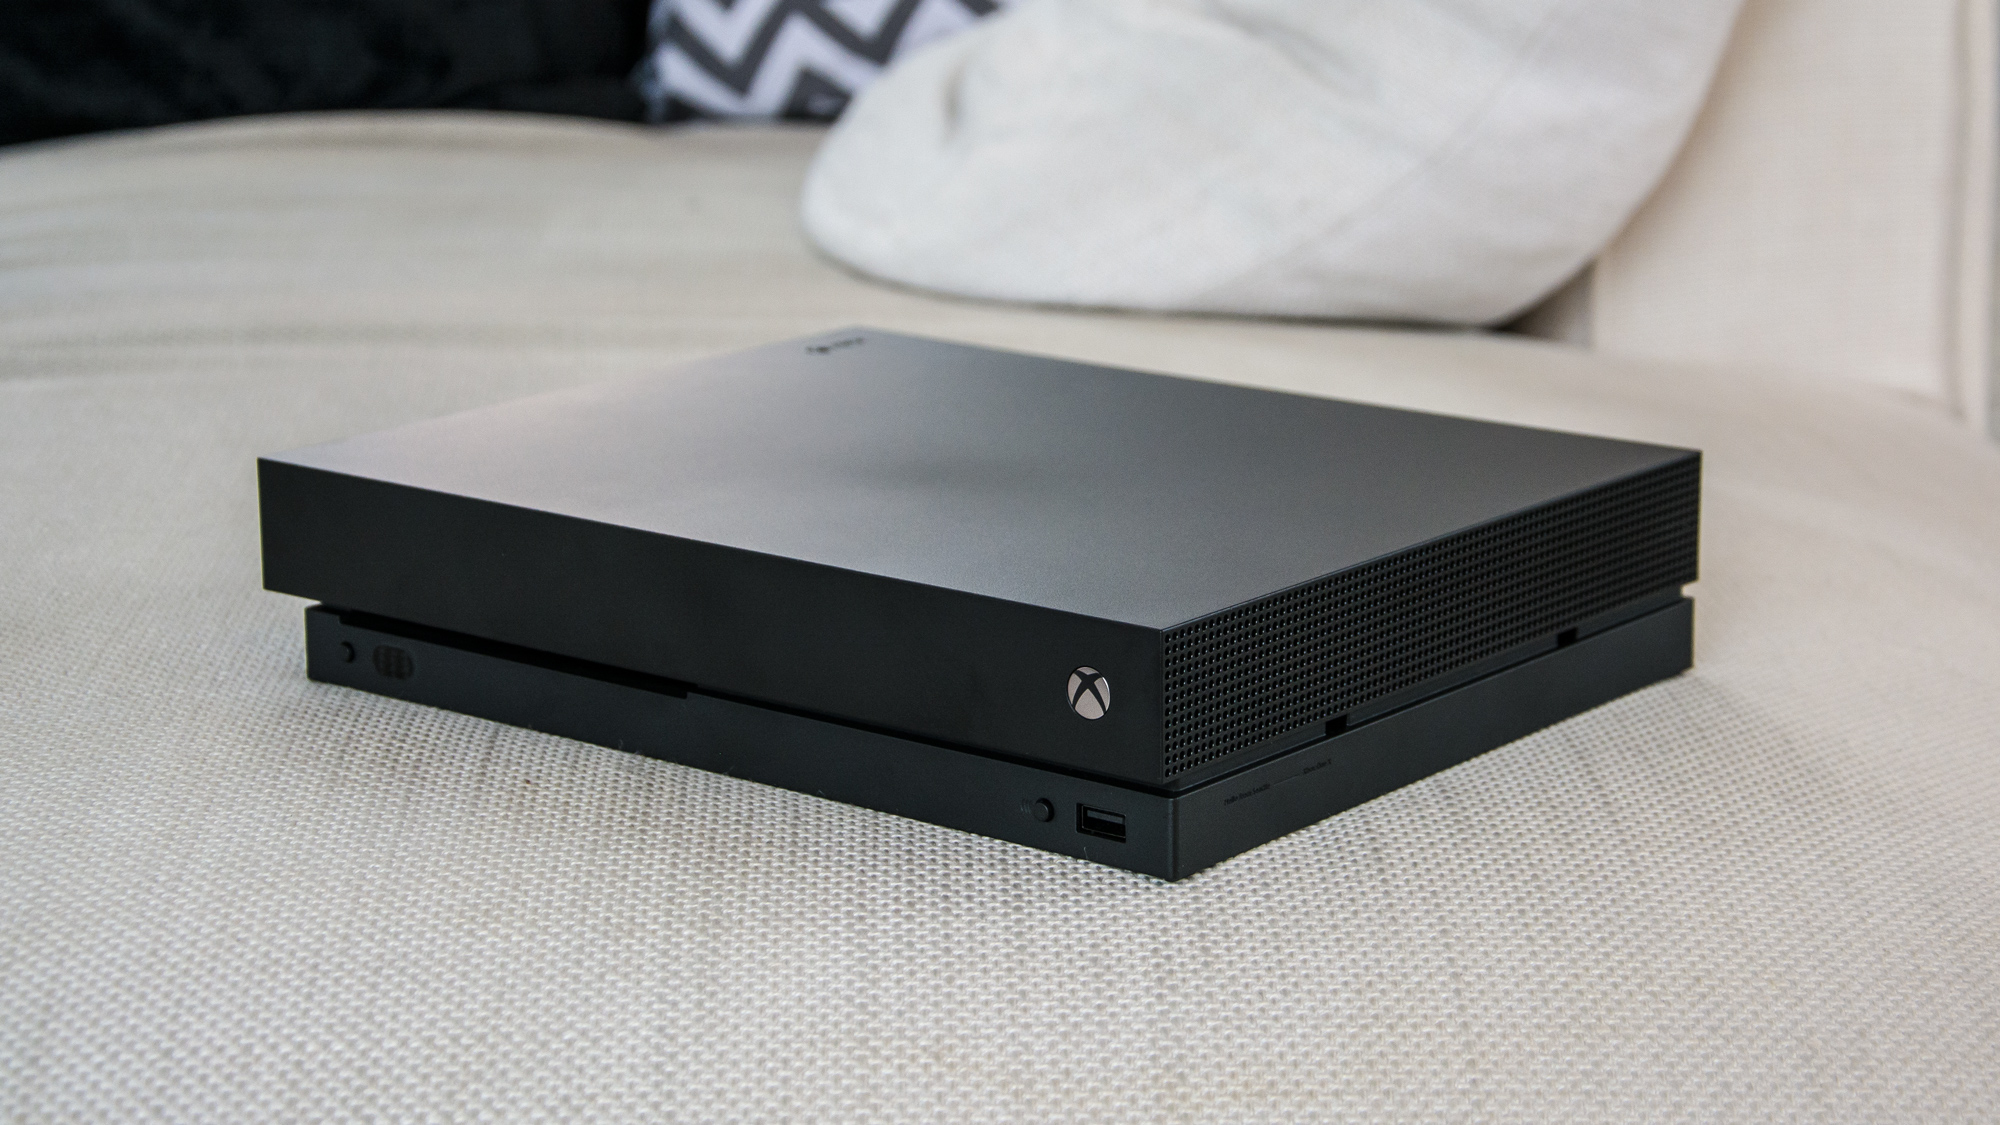 Almighty Actor To kill Xbox One X review: A lot of power with zero oomph